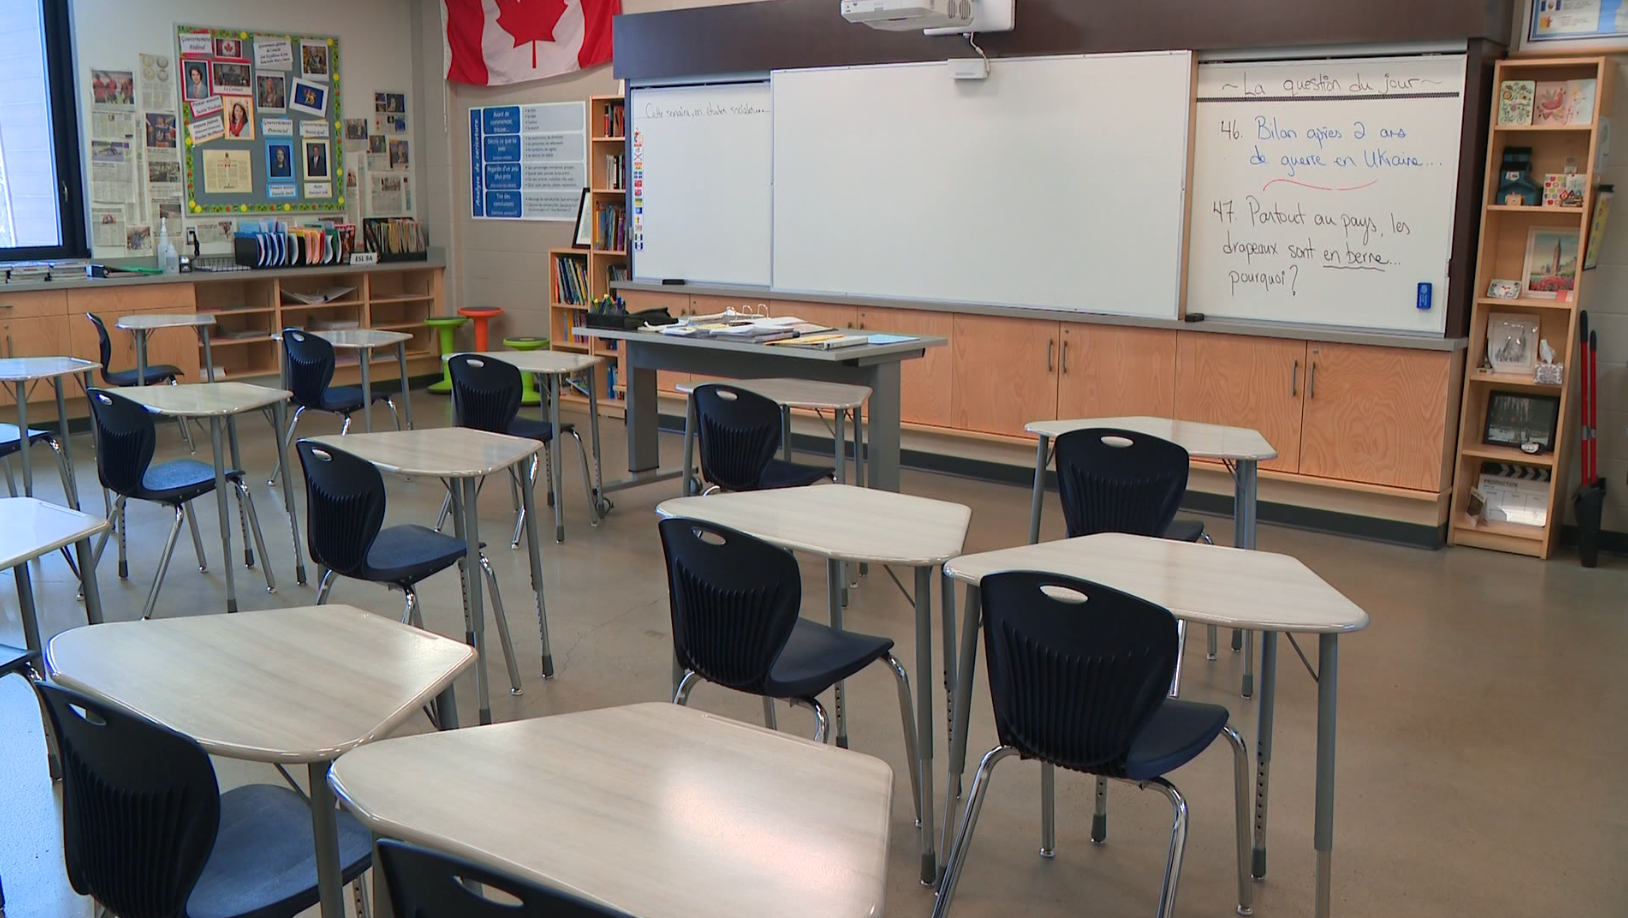 New Francophone school planned for West Edmonton as part of Alberta government budget